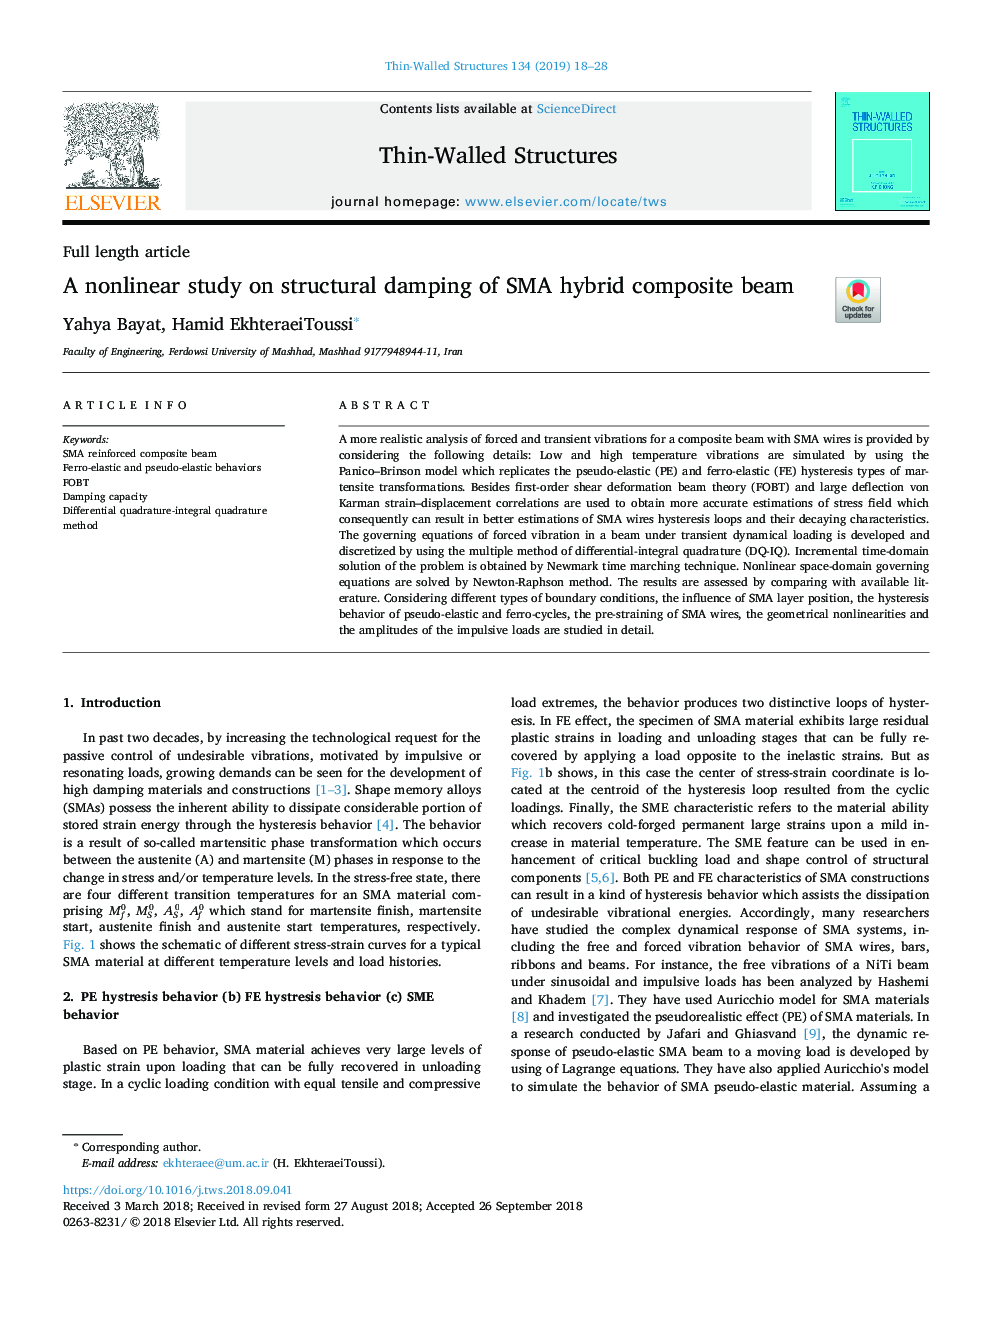 A nonlinear study on structural damping of SMA hybrid composite beam